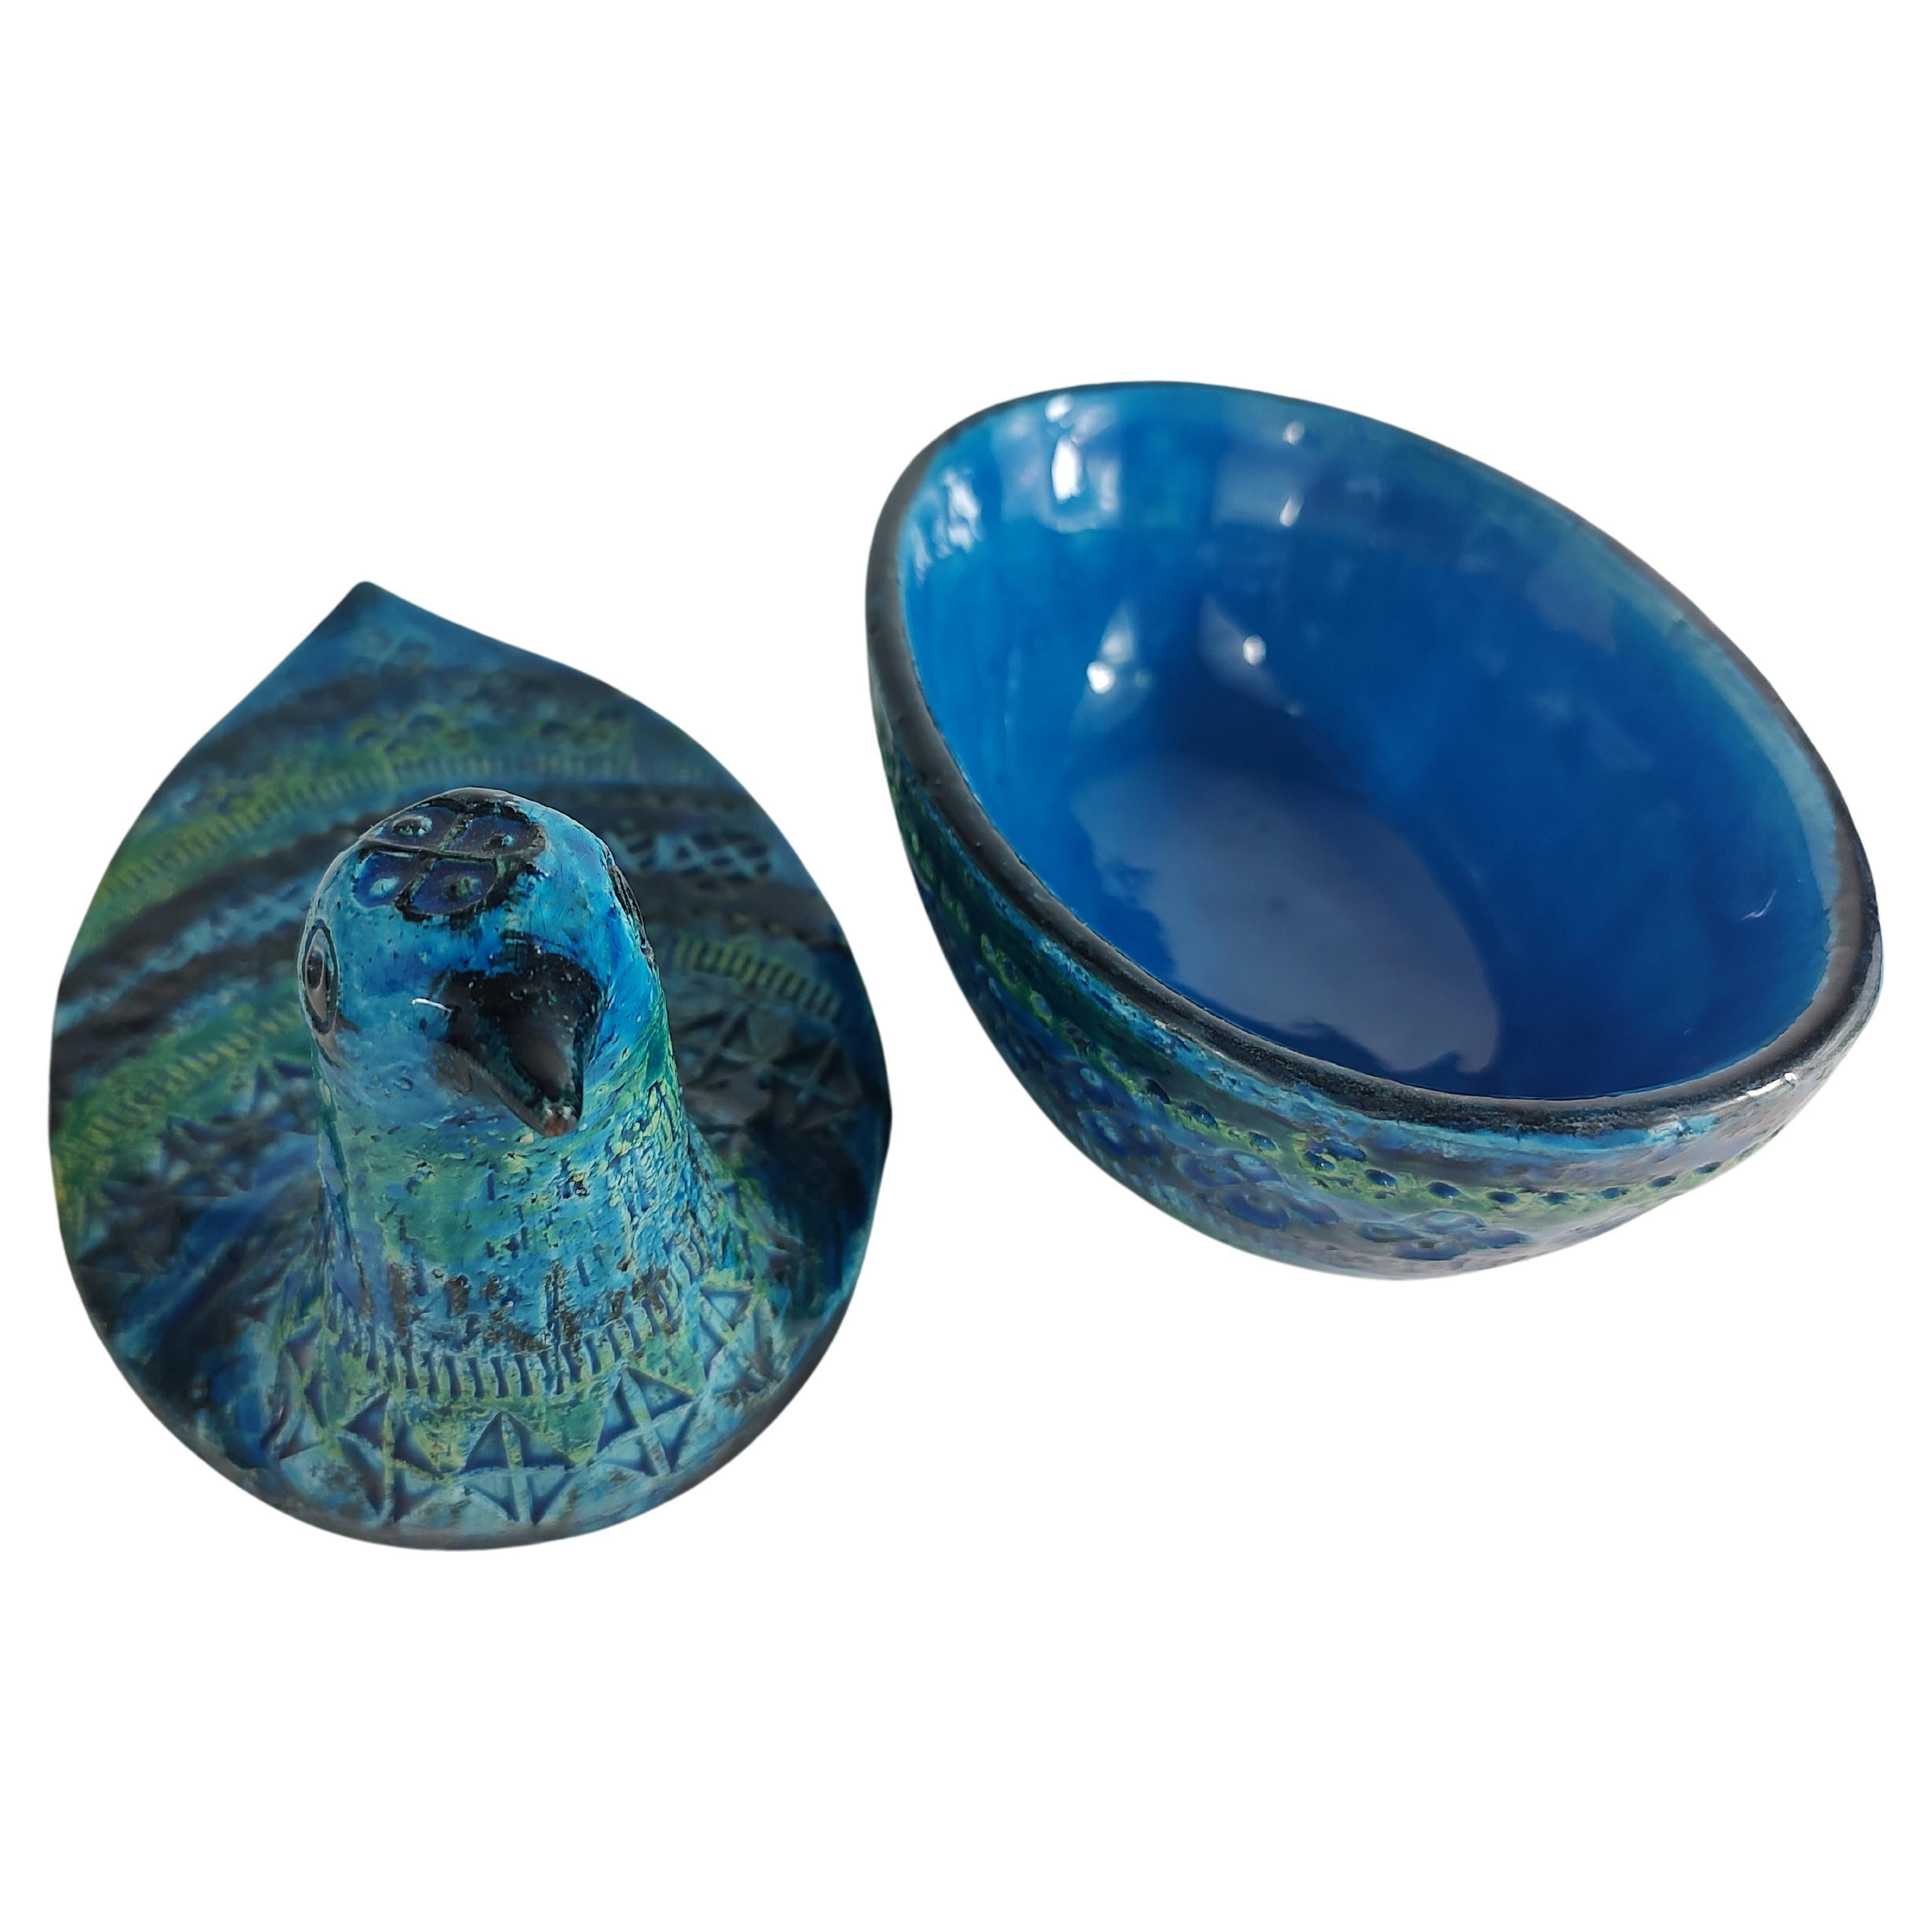 Fabulous two piece covered jar in the form of a hen - bird glazed in Rimini Blue by Aldo Londi and Bitossi. Beautiful workmanship and a very serene color combination with fantastic impressions. Created in Italy during the mid sixties and in